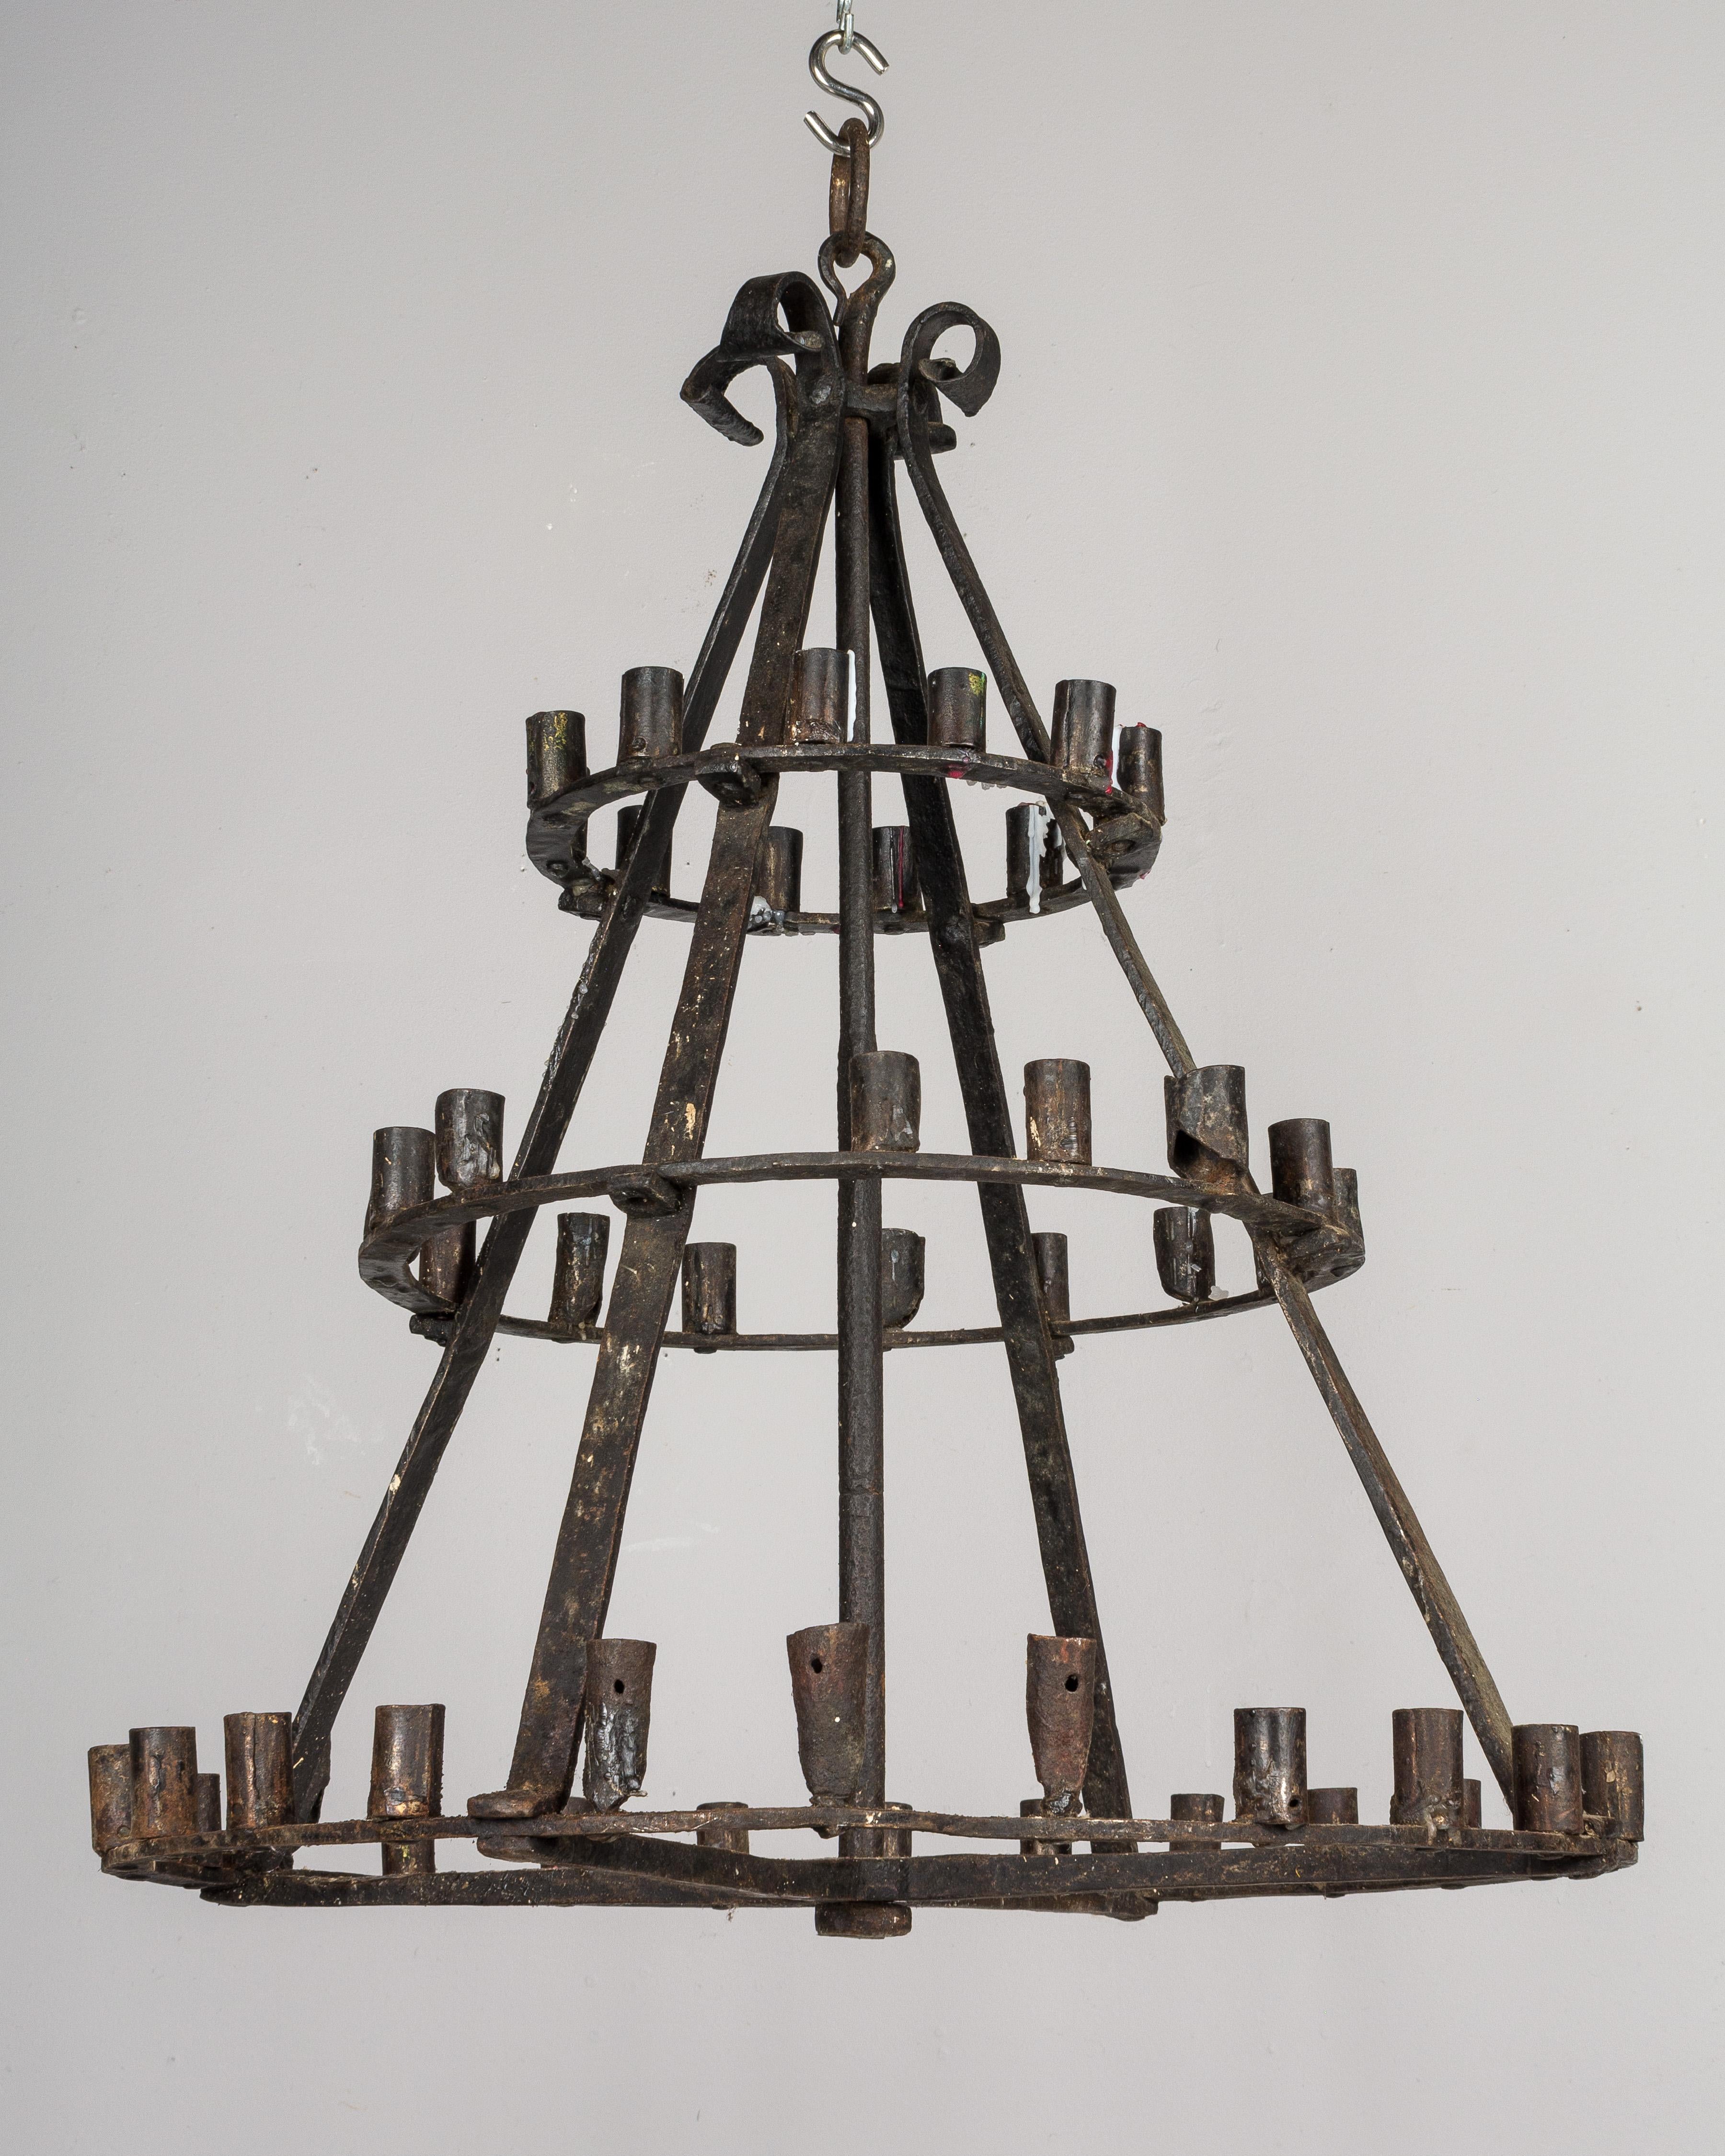 Hand-Crafted 19th Century French Wrought Iron Candle Chandelier